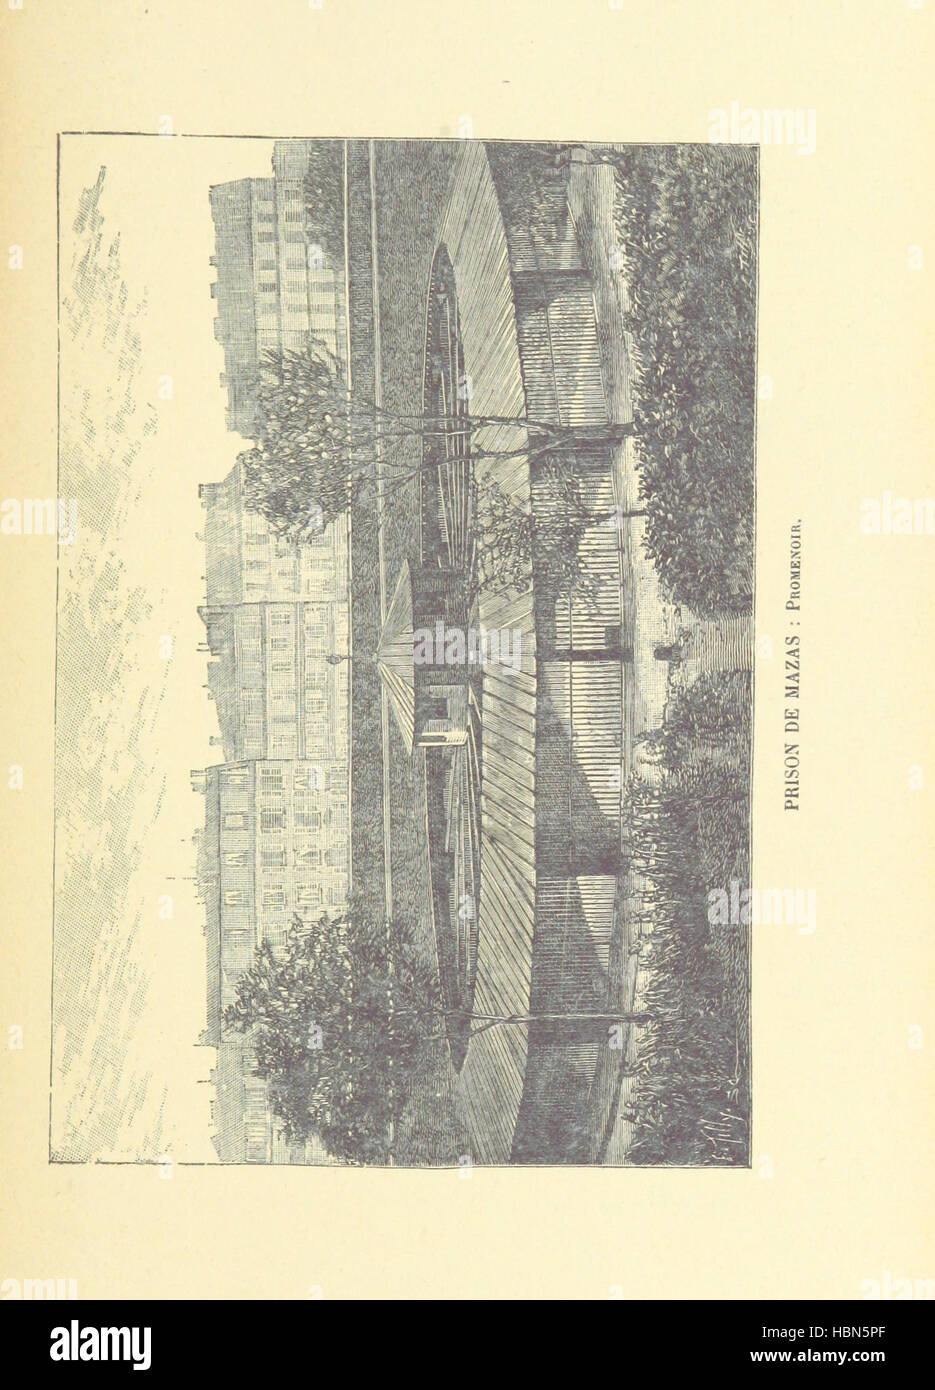 Image taken from page 109 of '[The Evolution of France under the Third Republic ... Translated from the French by Isabel F. Hapgood. Authorized edition with special preface and additions, and introdtion by Dr. Albert Shaw. [With plates.]]' Image taken from page 109 of '[The Evolution of France Stock Photo